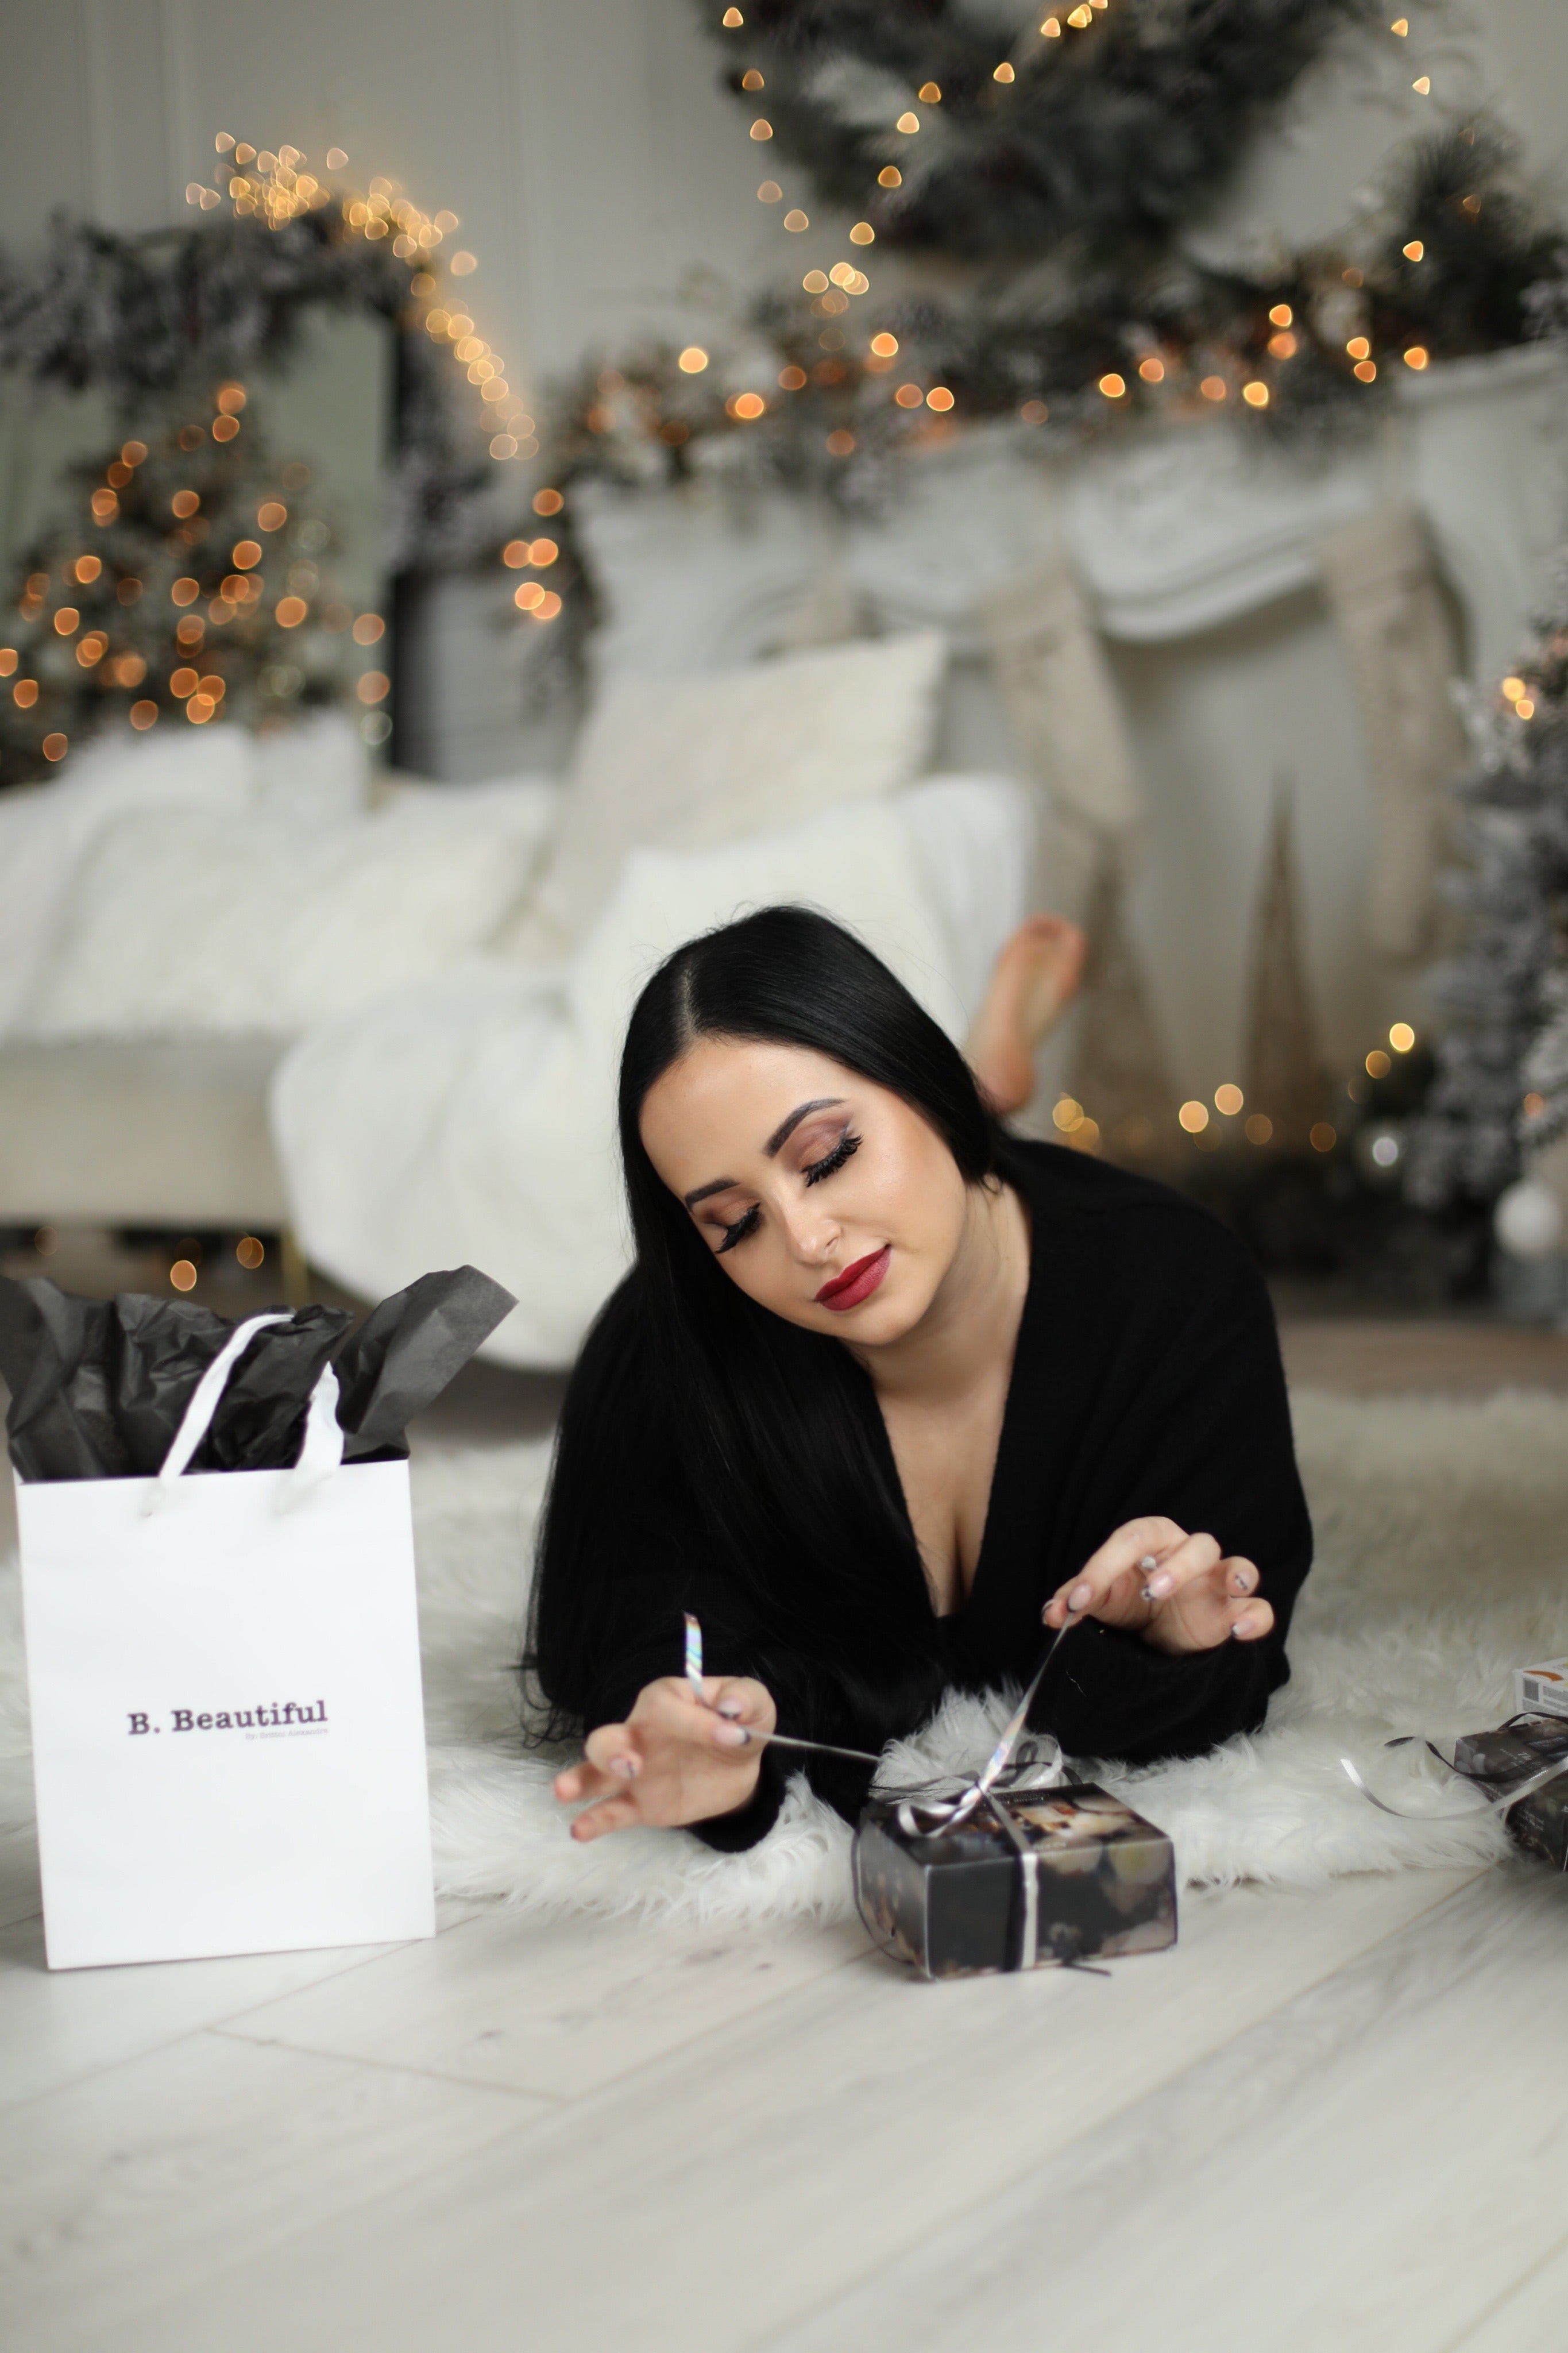 B.Beautiful Holiday Gift Sets Are Finally Here Once Again!